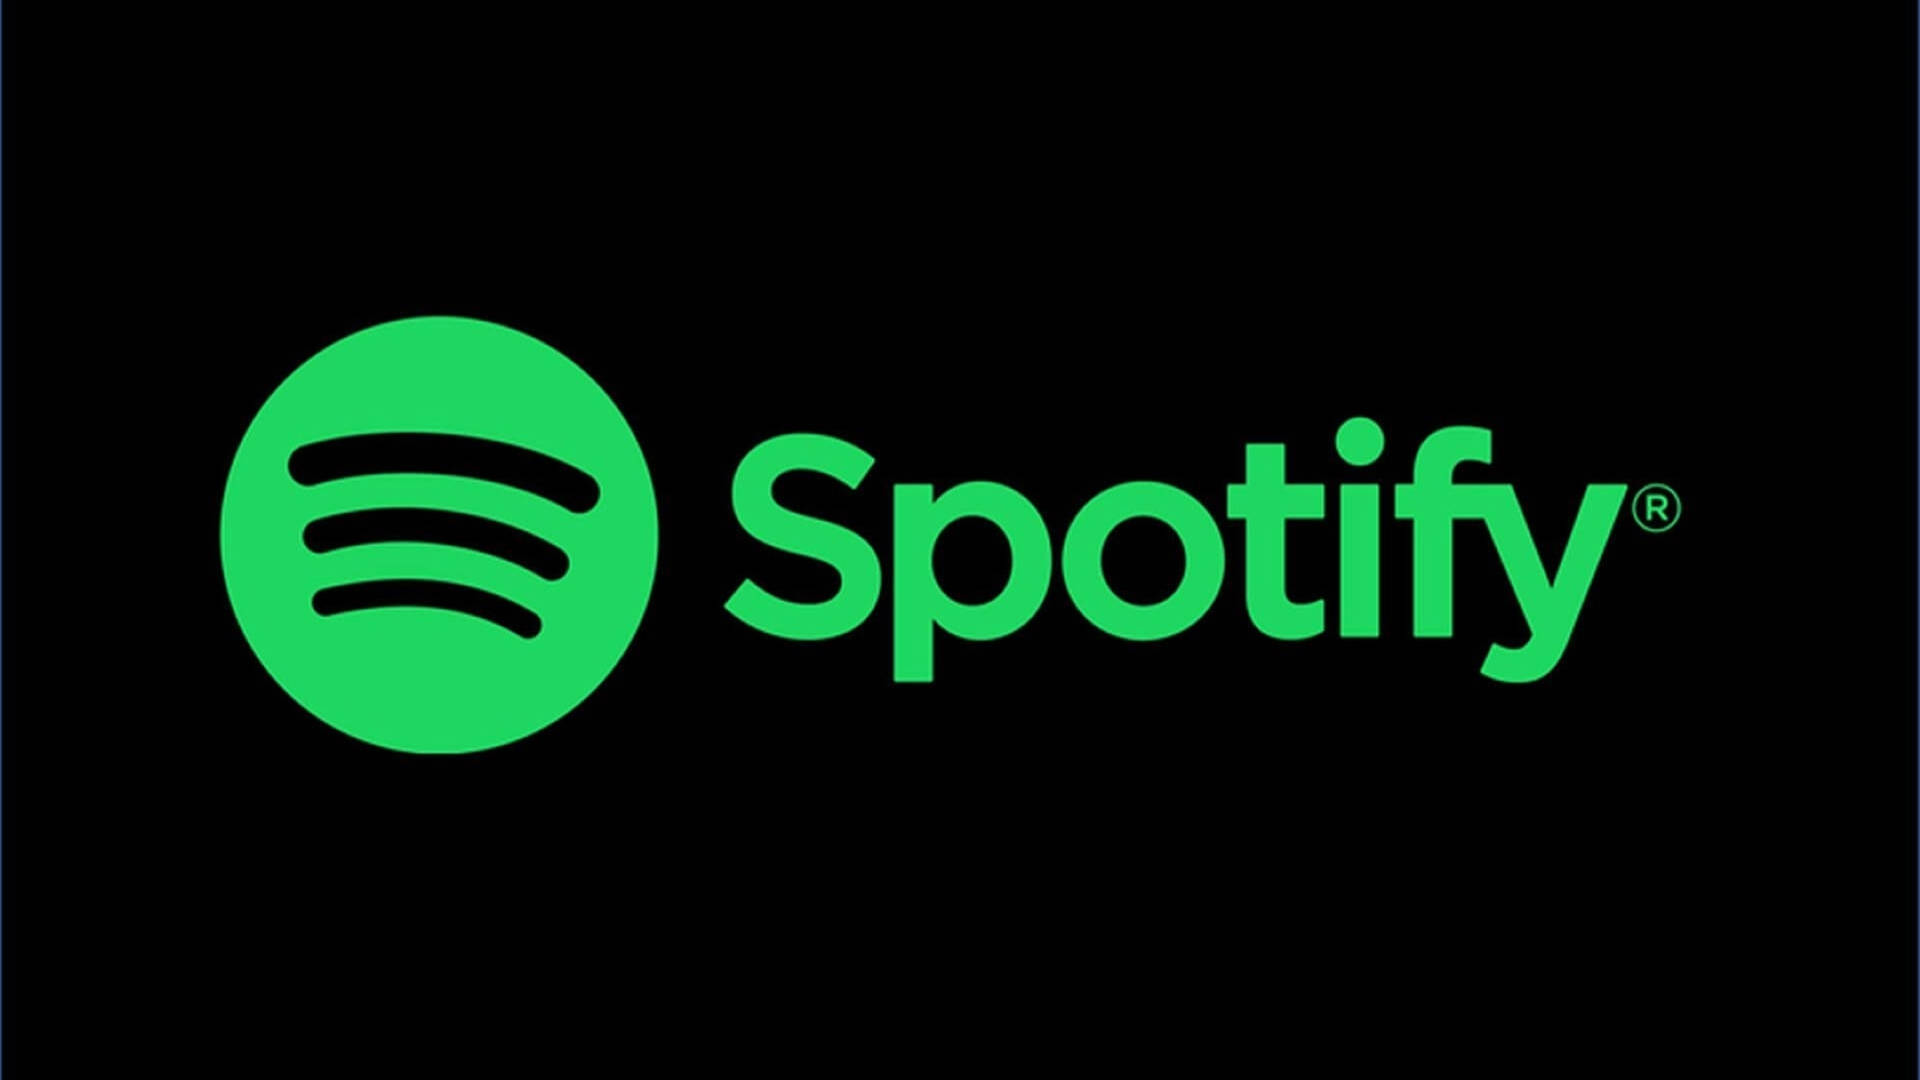 Spotify Official Trademark Background